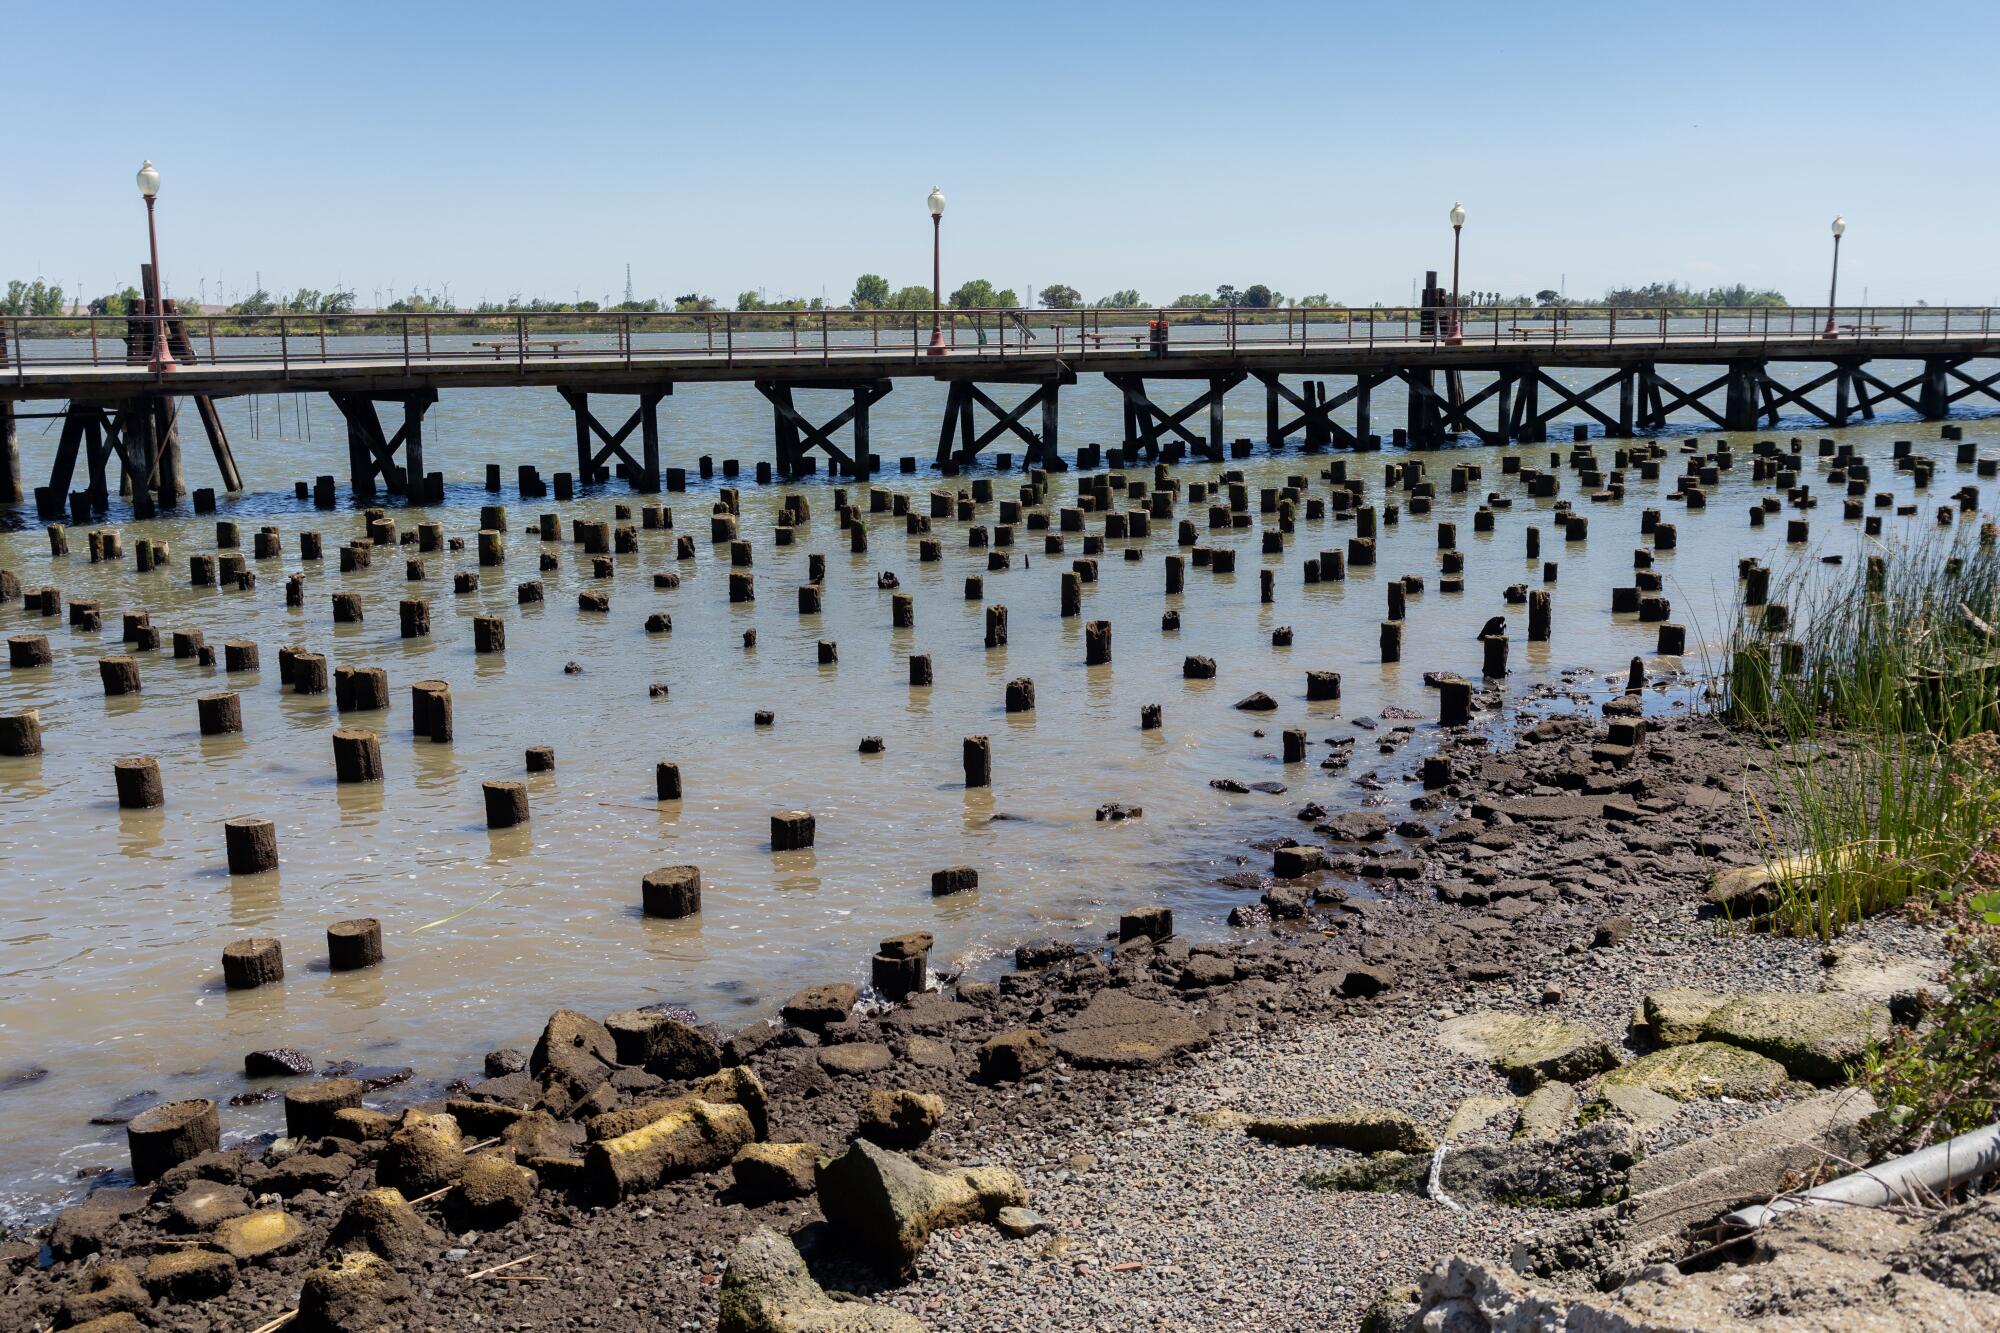 The waterfront of the former Chinatown in Antioch includes the remains of the original residential foundations.